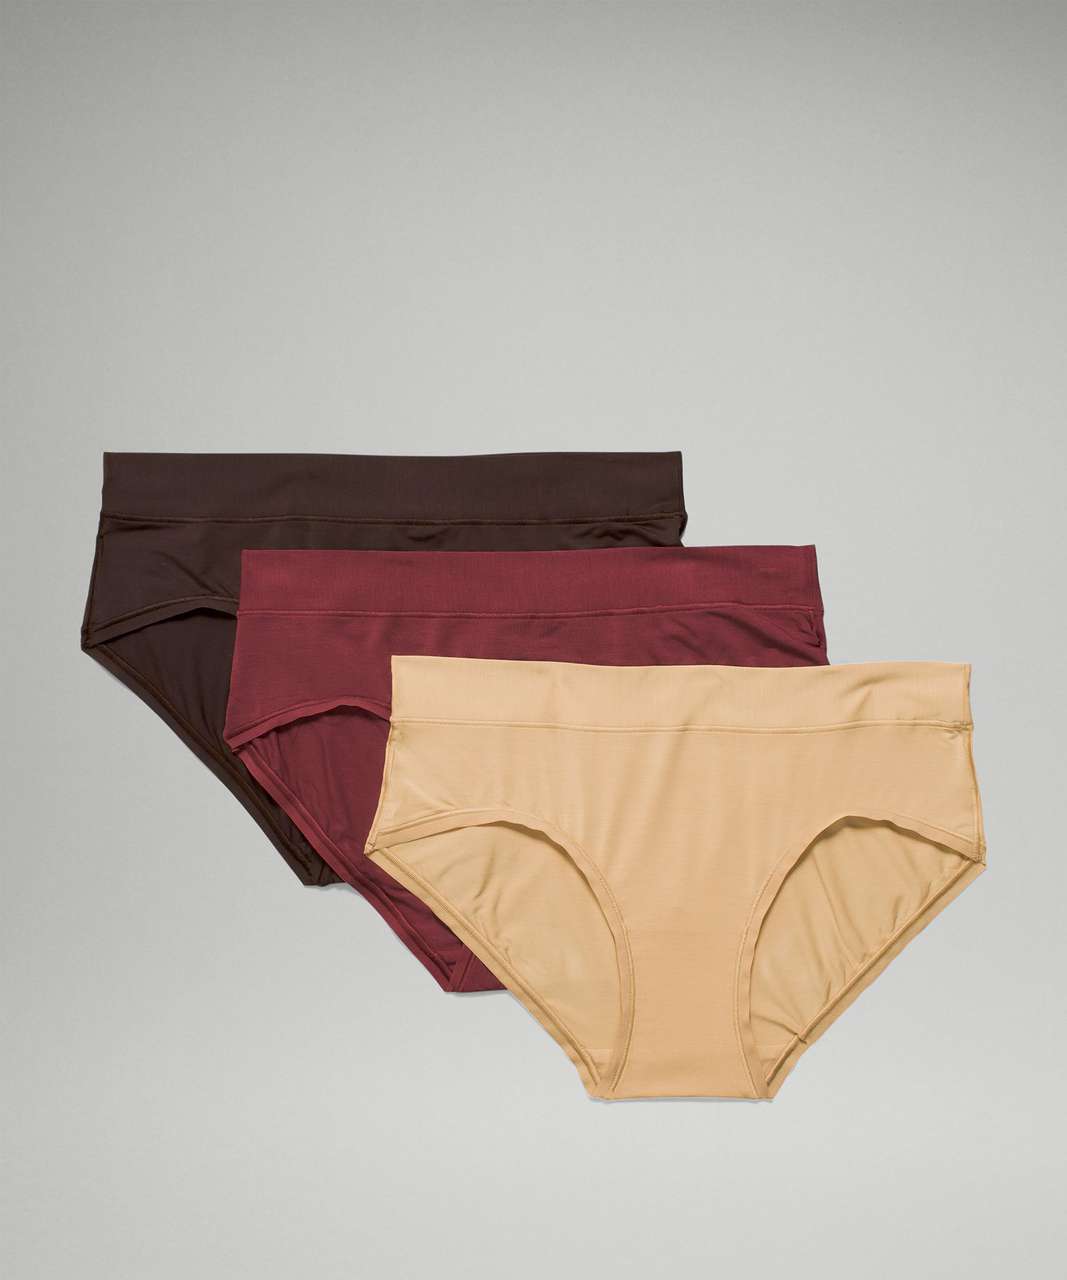 Lululemon UnderEase Mid-Rise Hipster Underwear 3 Pack - Mulled Wine / Pecan Tan / French Press